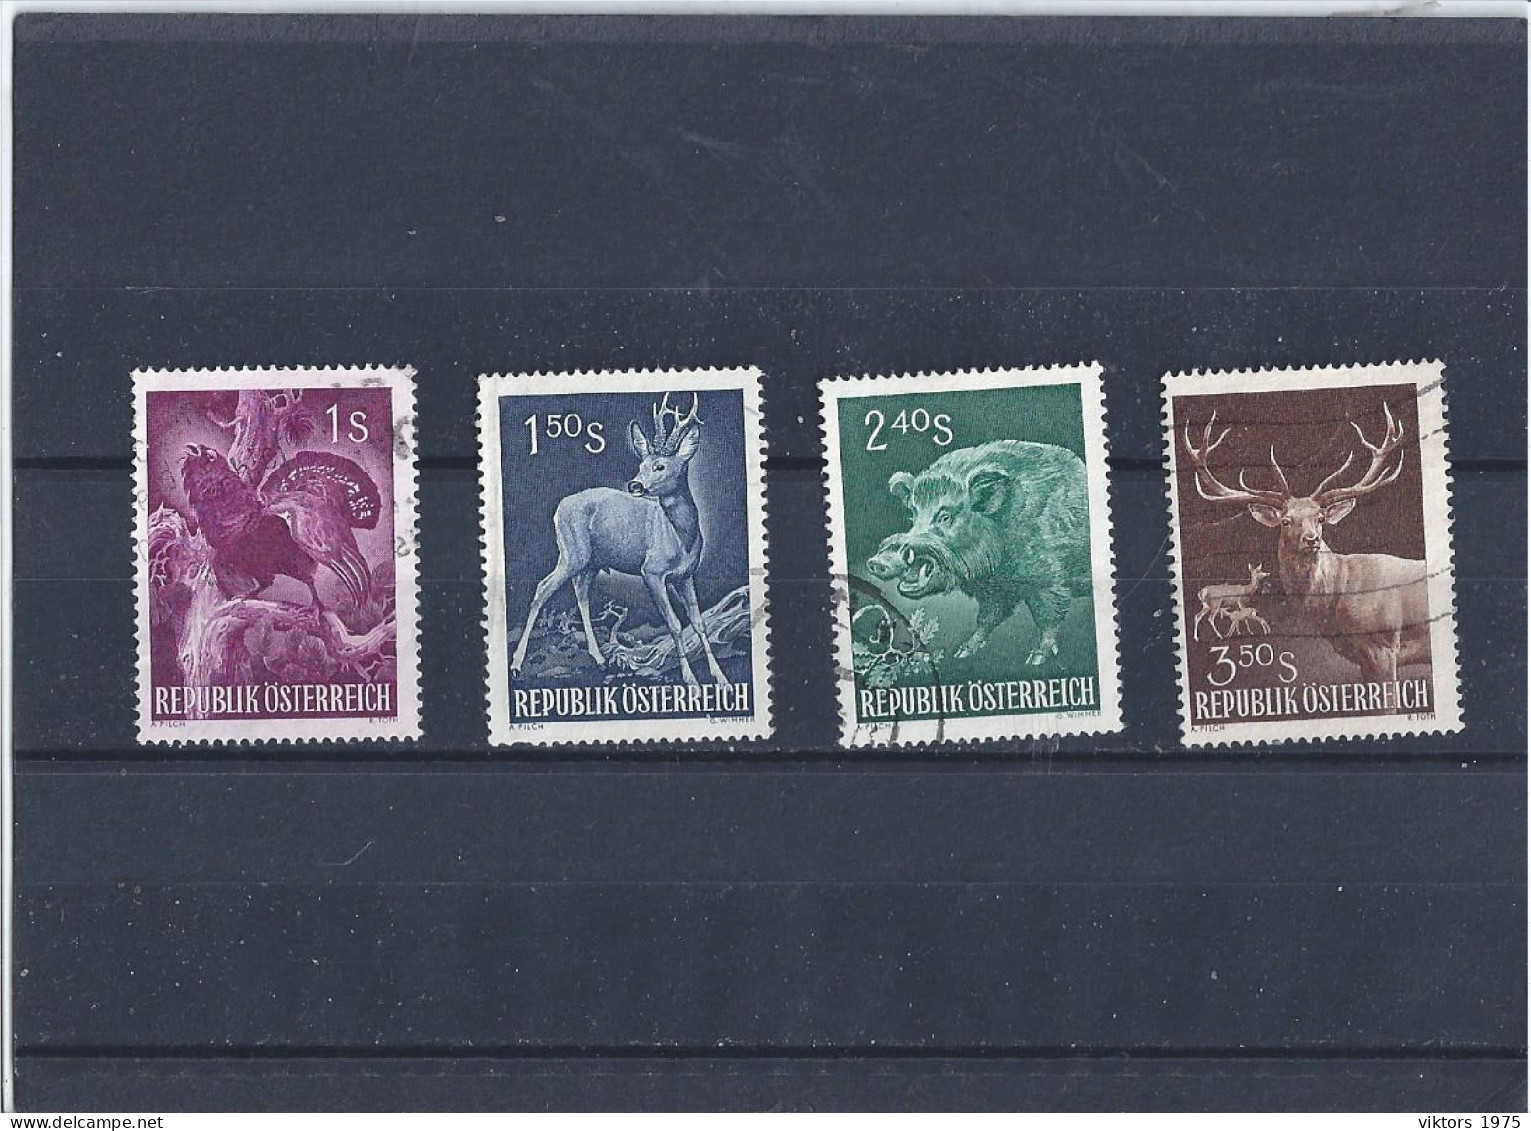 Used Stamps Nr.1062-1065 In MICHEL Catalog - Used Stamps